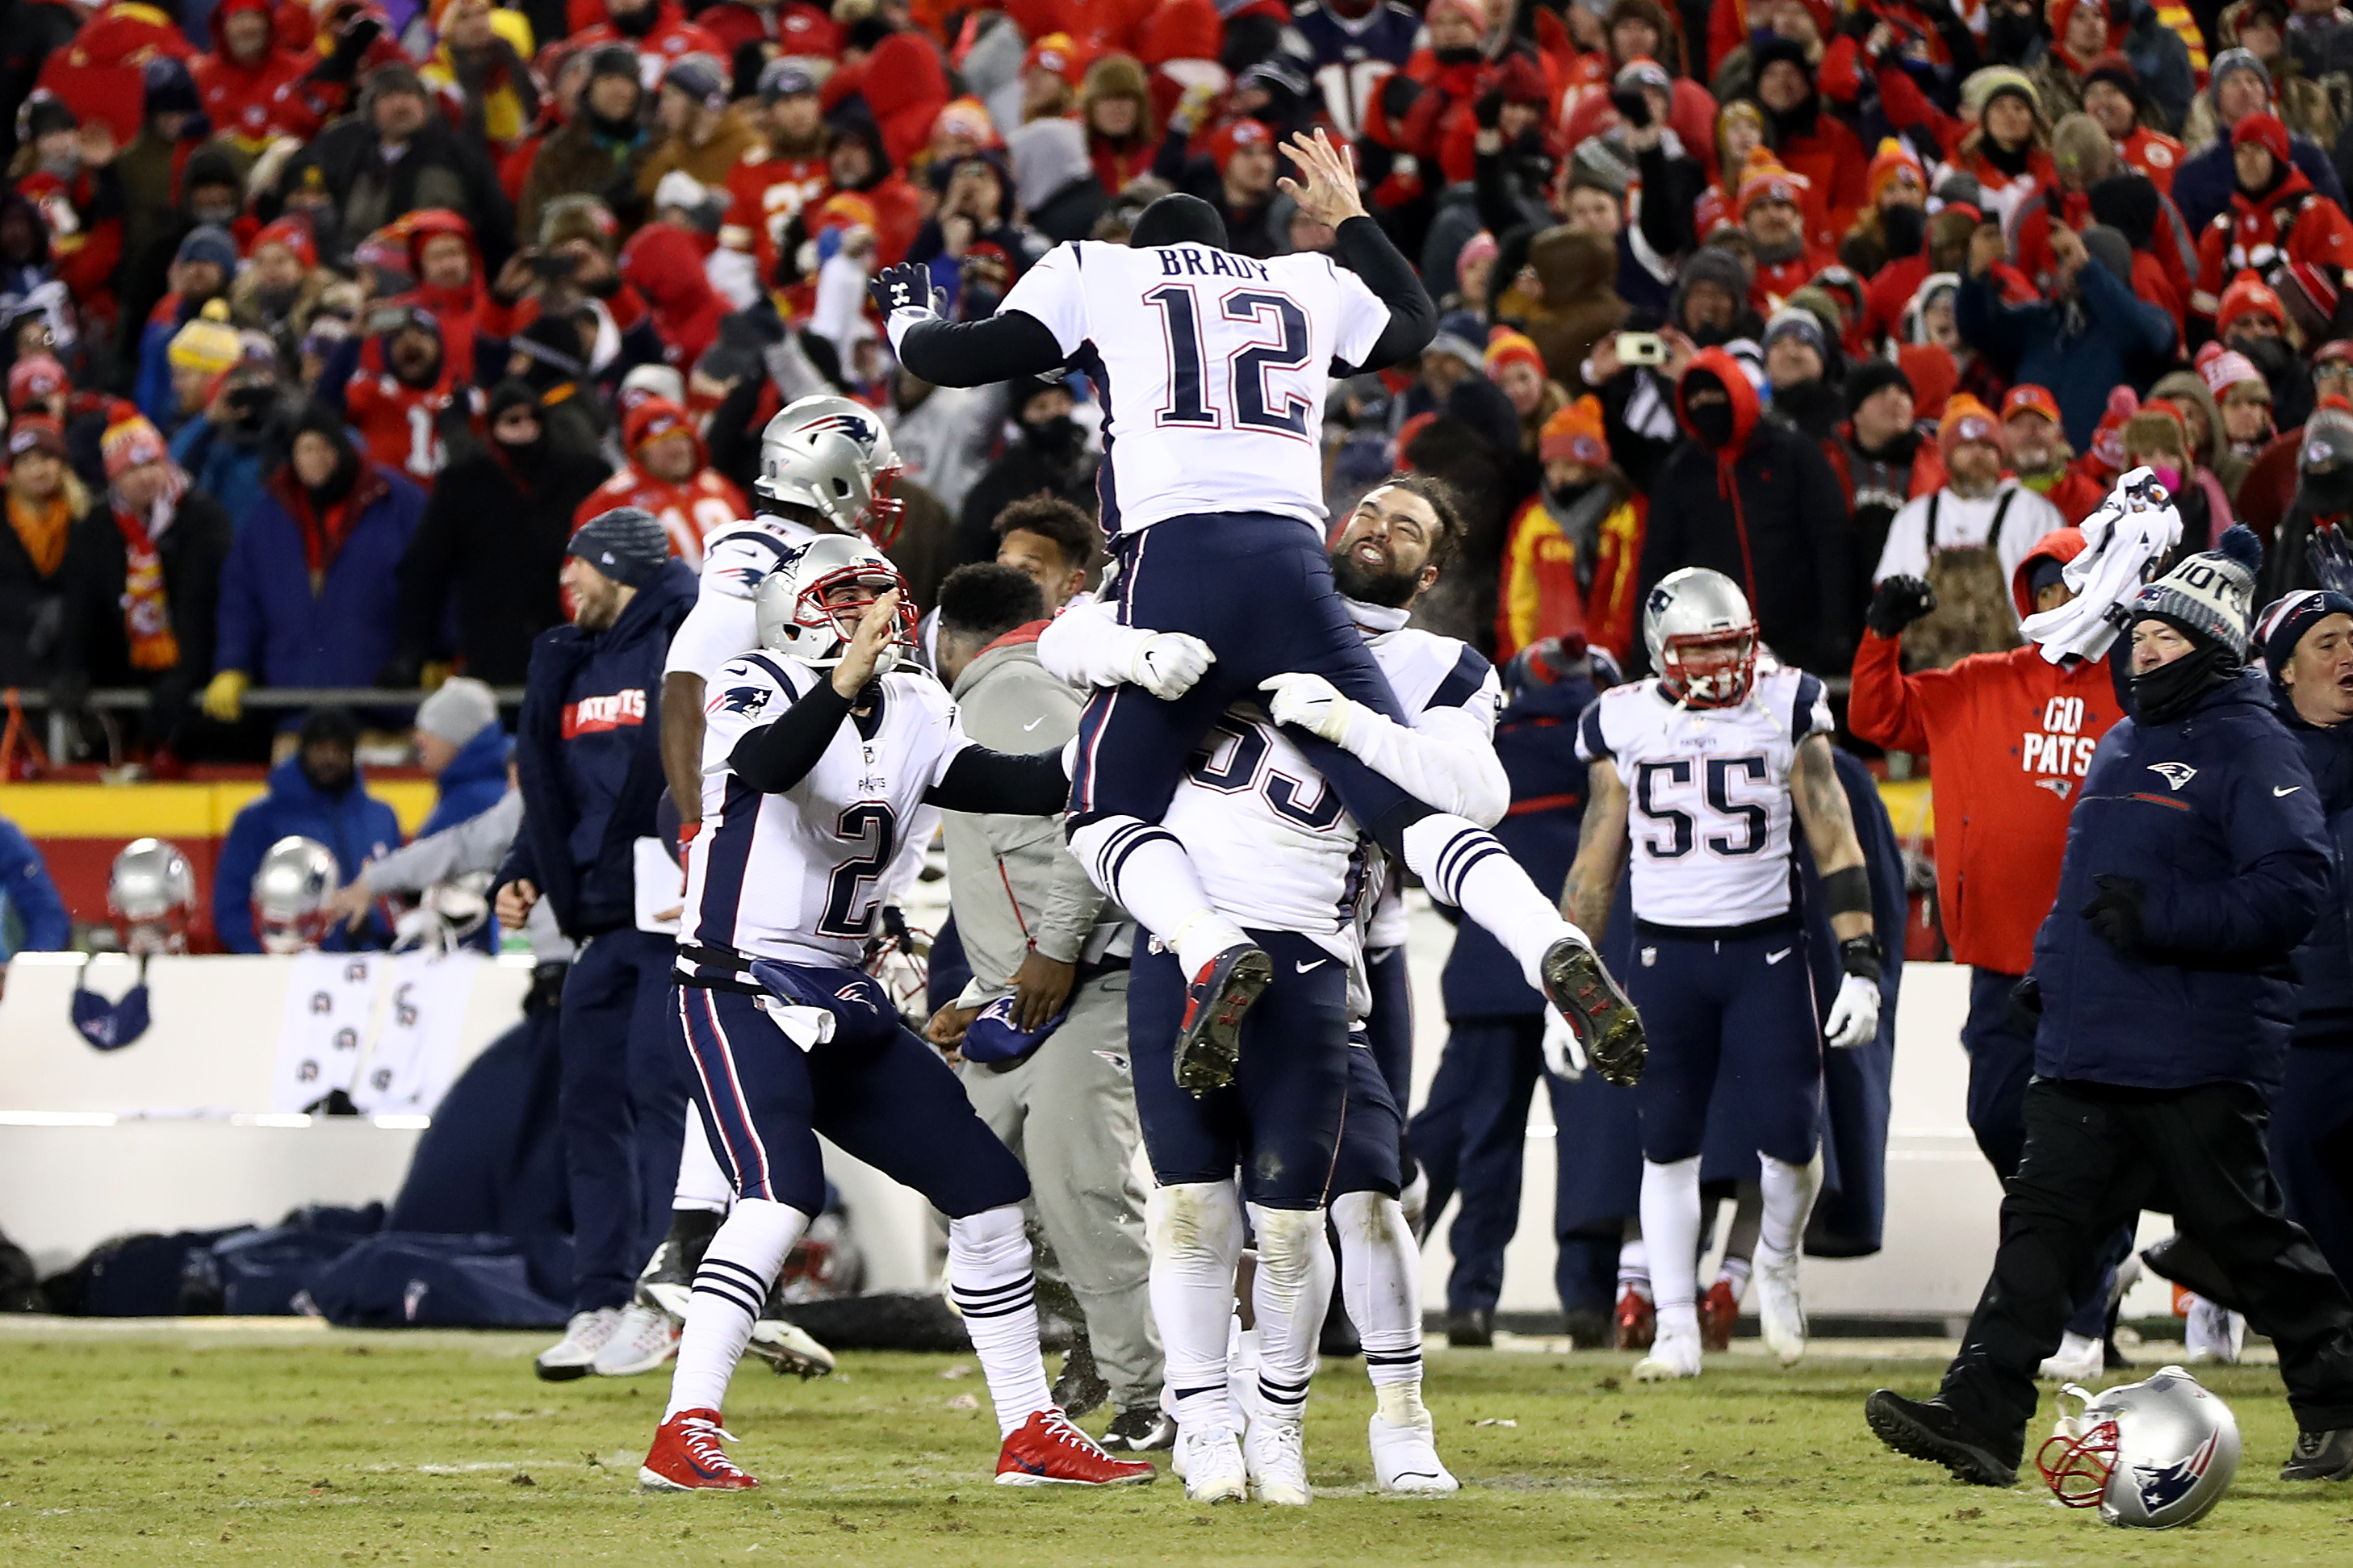 How to watch 'Man in the Arena: Tom Brady' latest episode 'Maybe' with  Julian Edelman, on 2019 OT win over Chiefs, Super Bowl win over Rams 